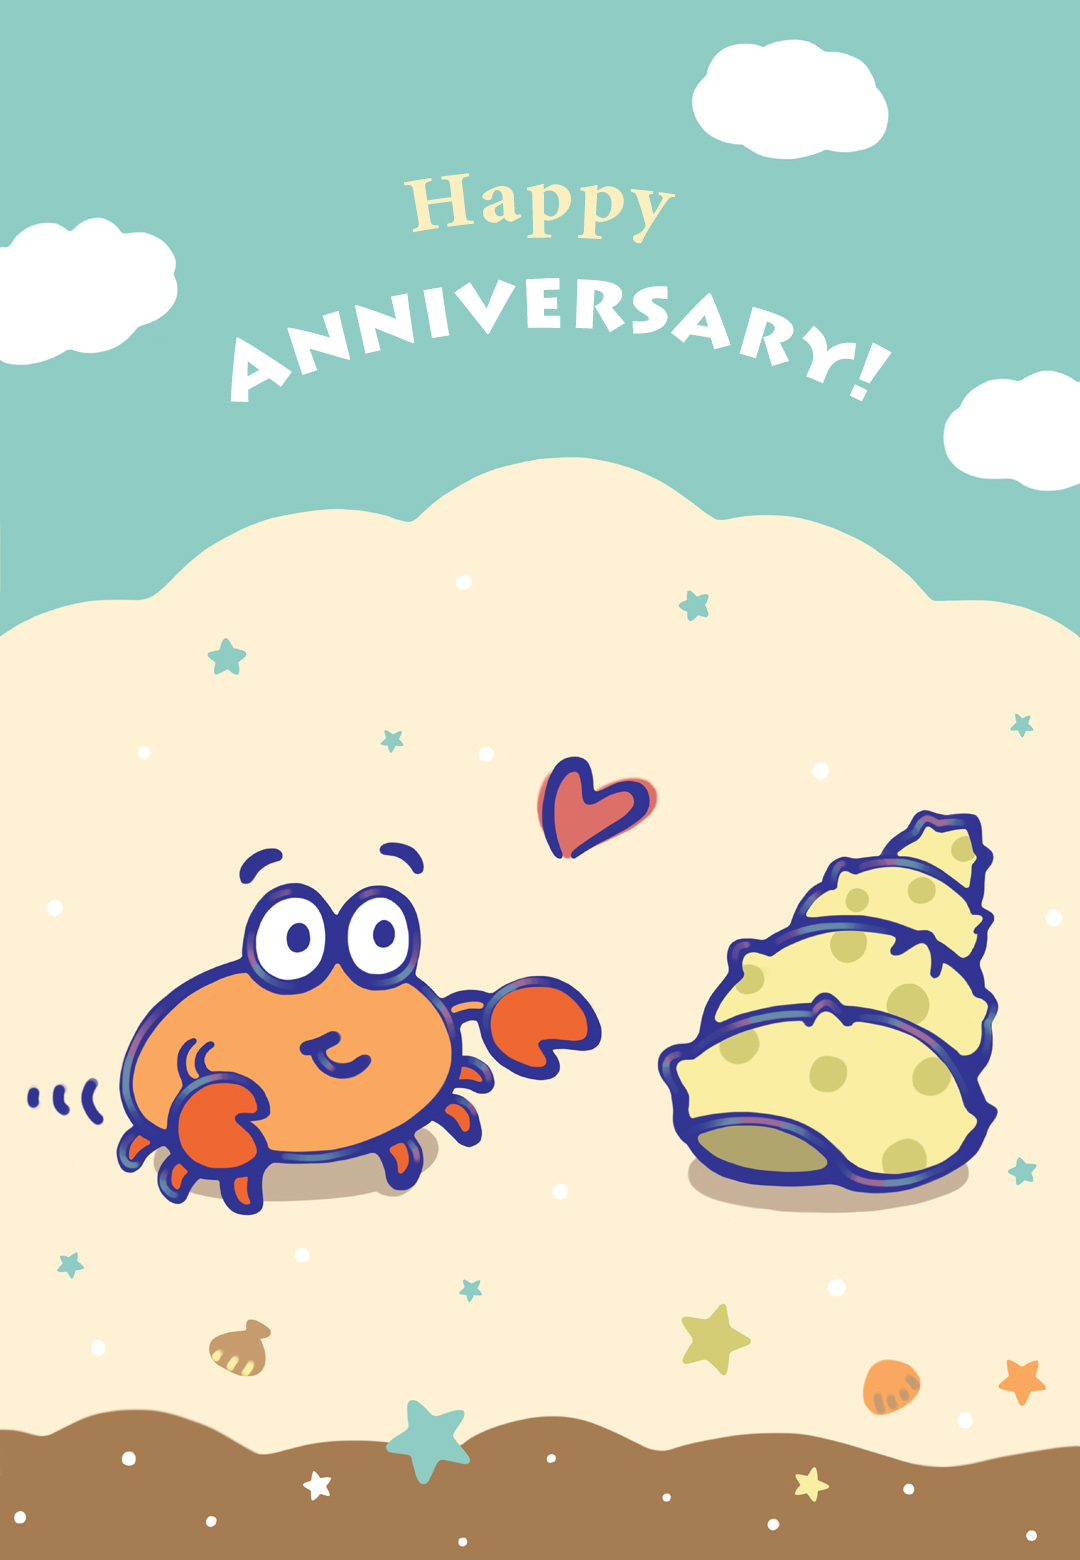 When I Found You - Free Happy Anniversary Card | Greetings Island - Printable Cards Free Anniversary